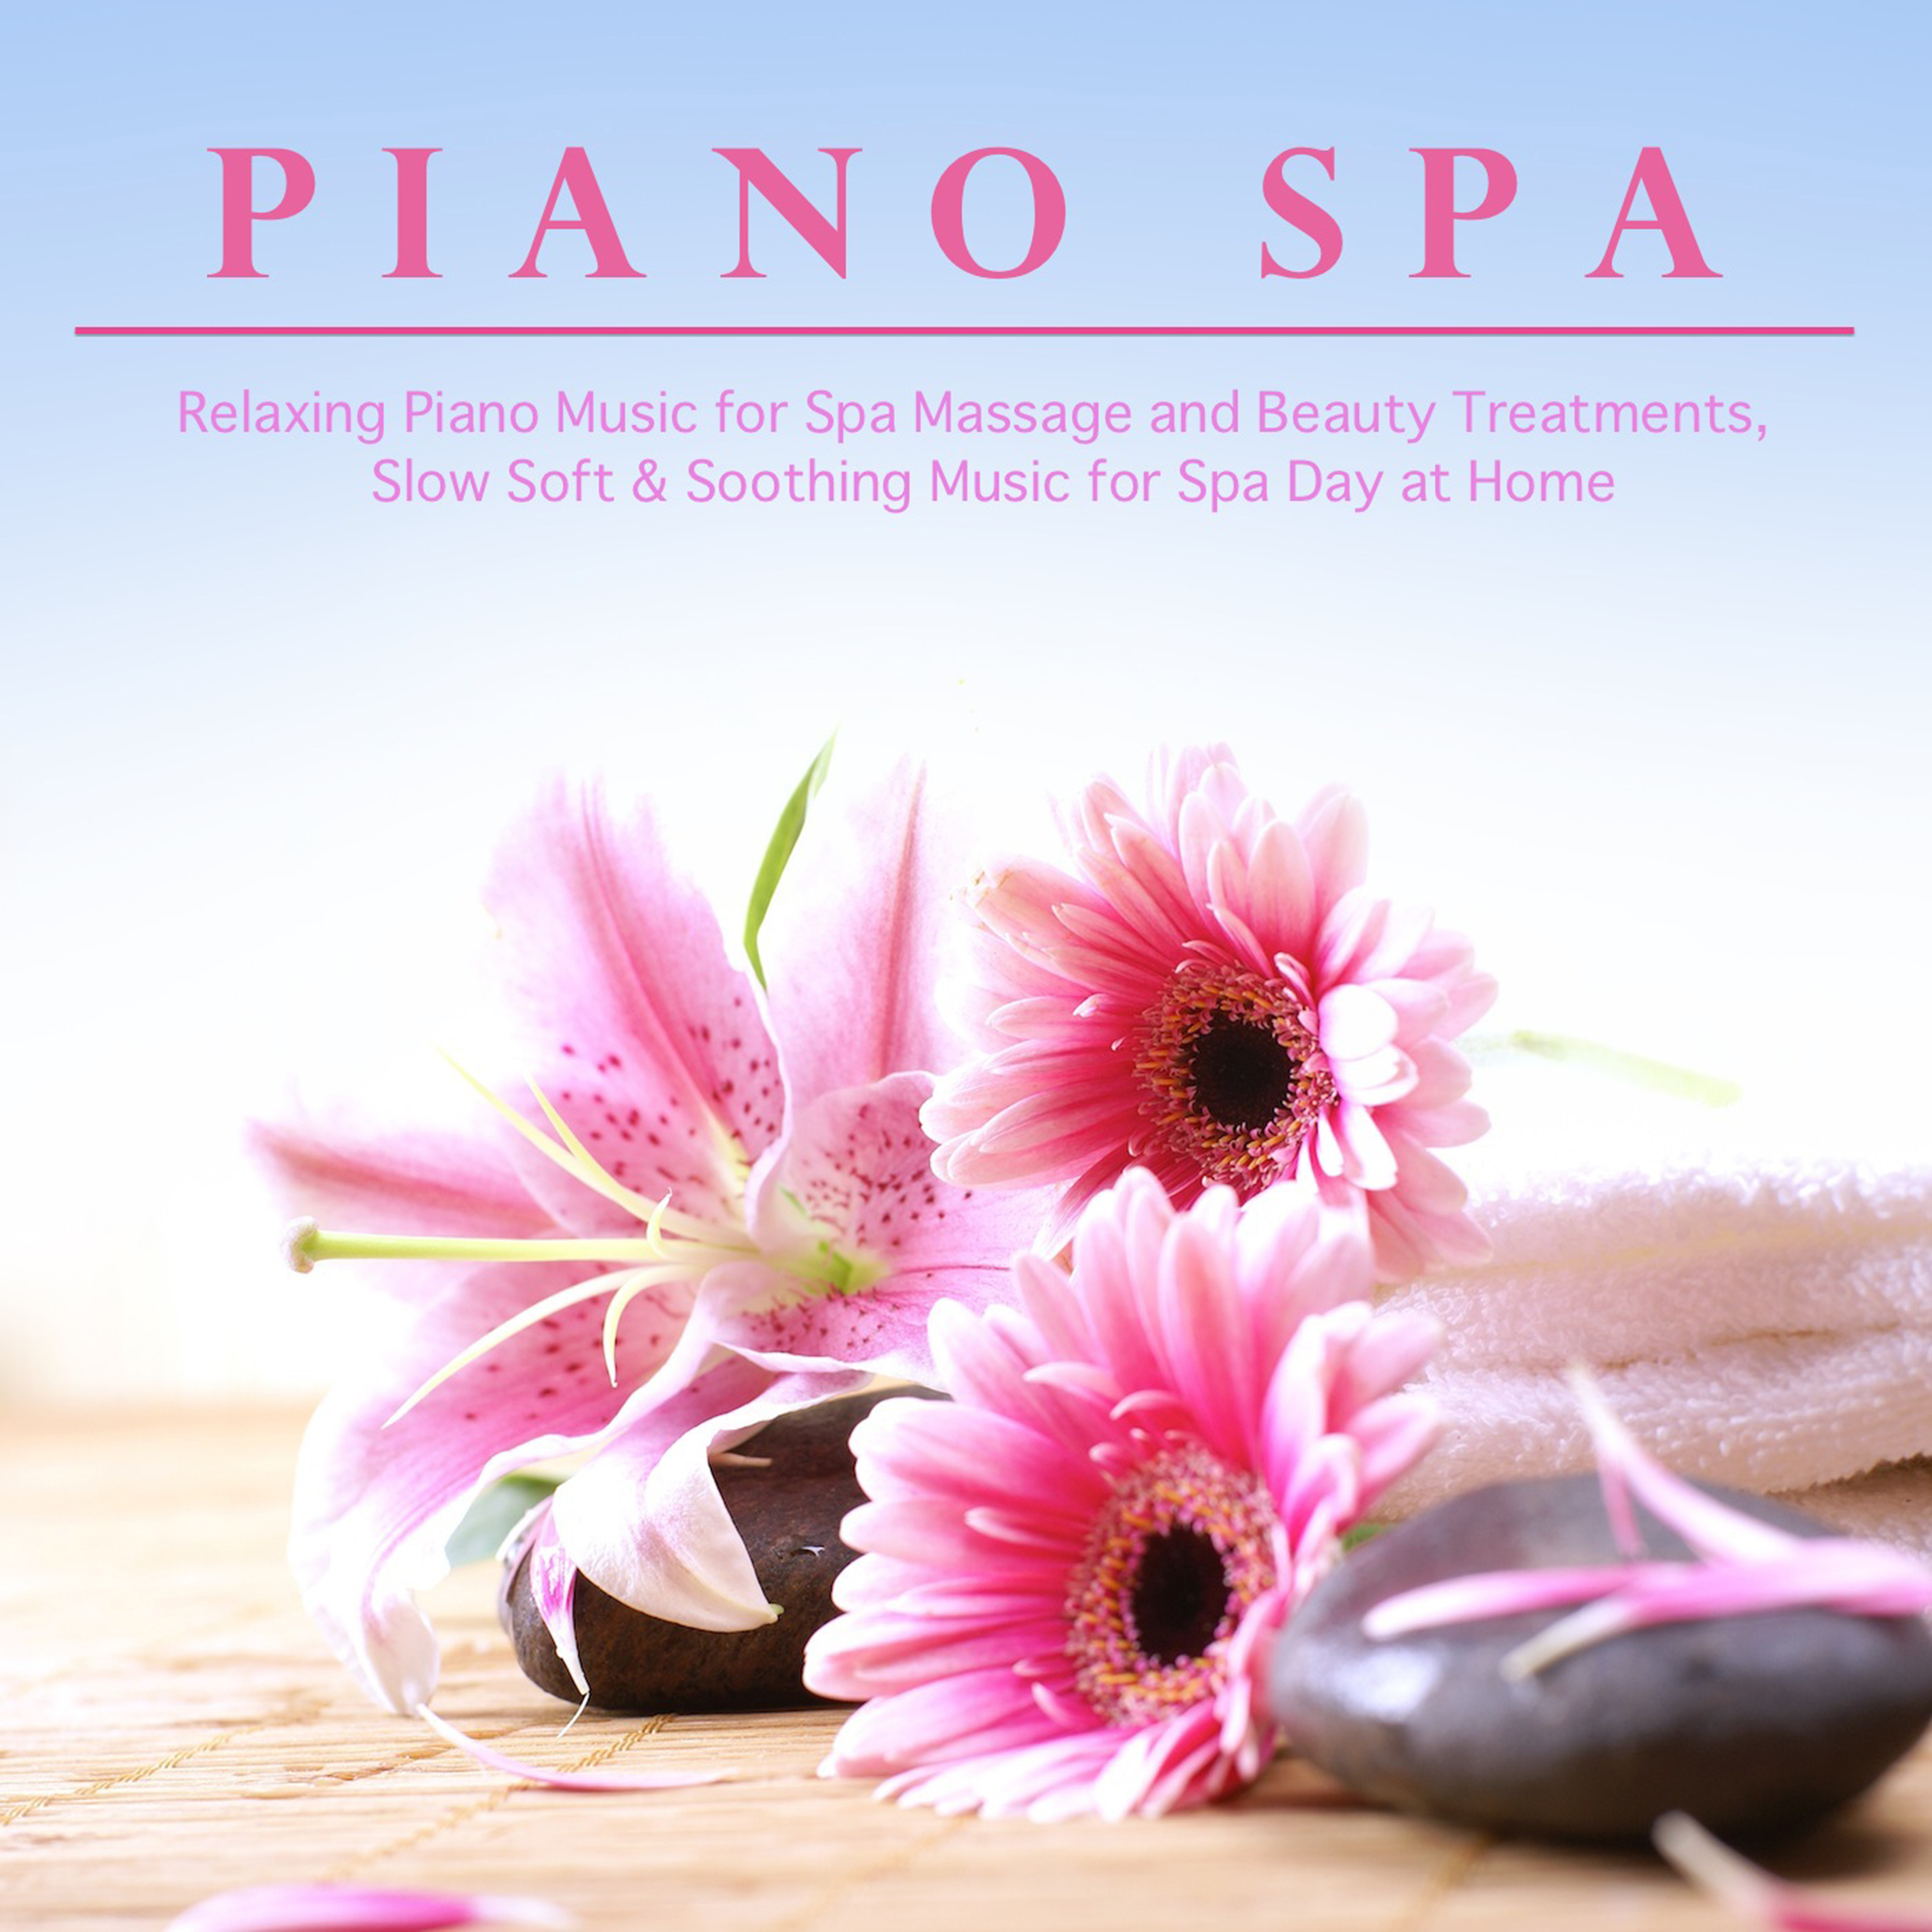 Piano Spa - Relaxing Piano Music for Spa Massage and Beauty Treatments, Slow Soft & Soothing Music for Spa Day At Home